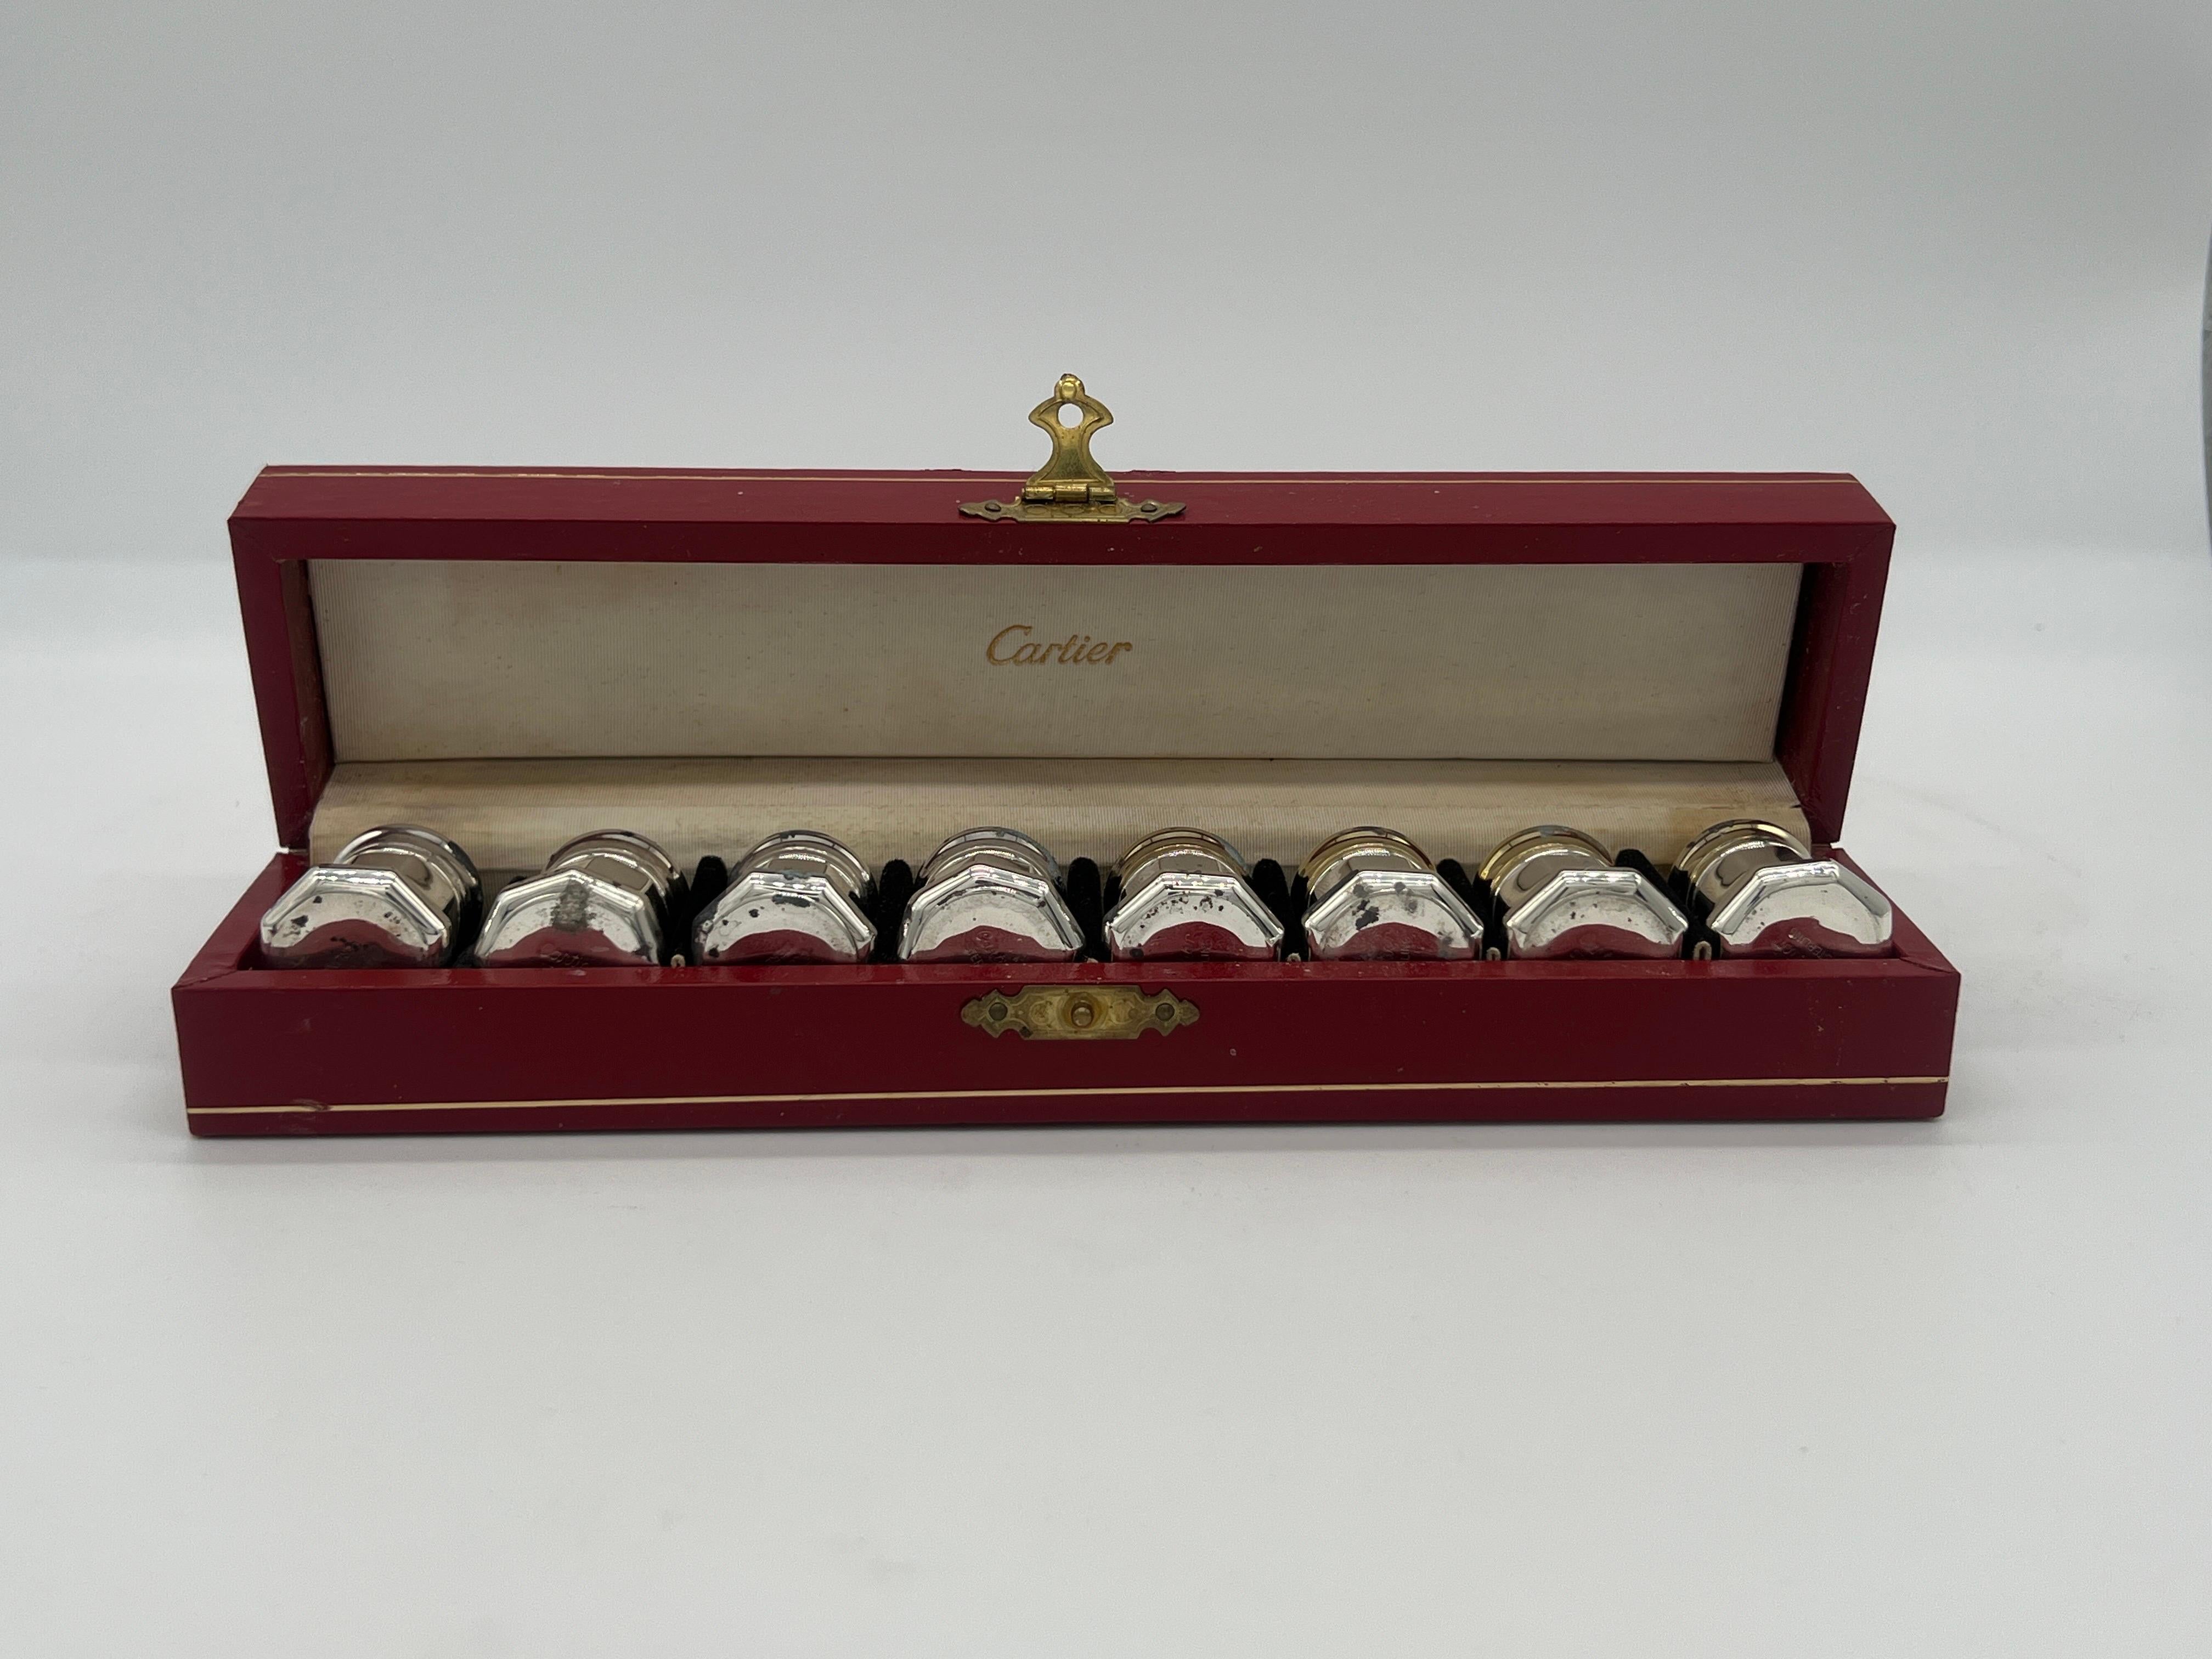 Cartier, circa 1990.

A set of 8 Cartier Sterling silver salt and pepper shakers. 4 of the shakers have a vermeil surface and are each marked Cartier Sterling to underside. Accompanied with original box.

Each measure 1.375